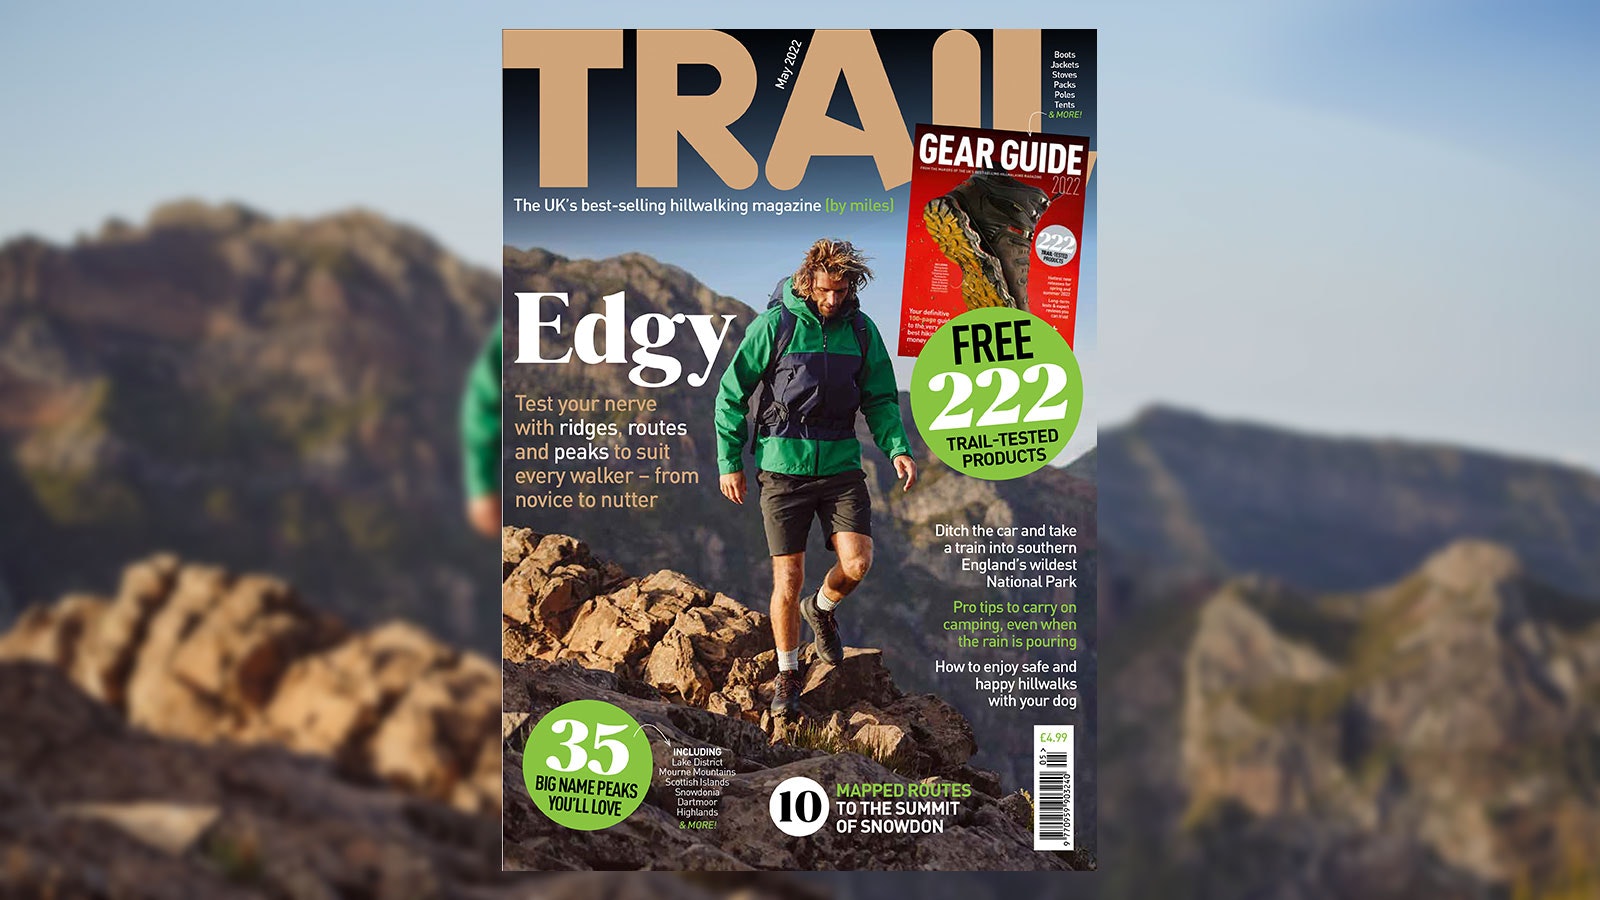 Trail magazine – the new May 2022 issue, including the 2022 Gear